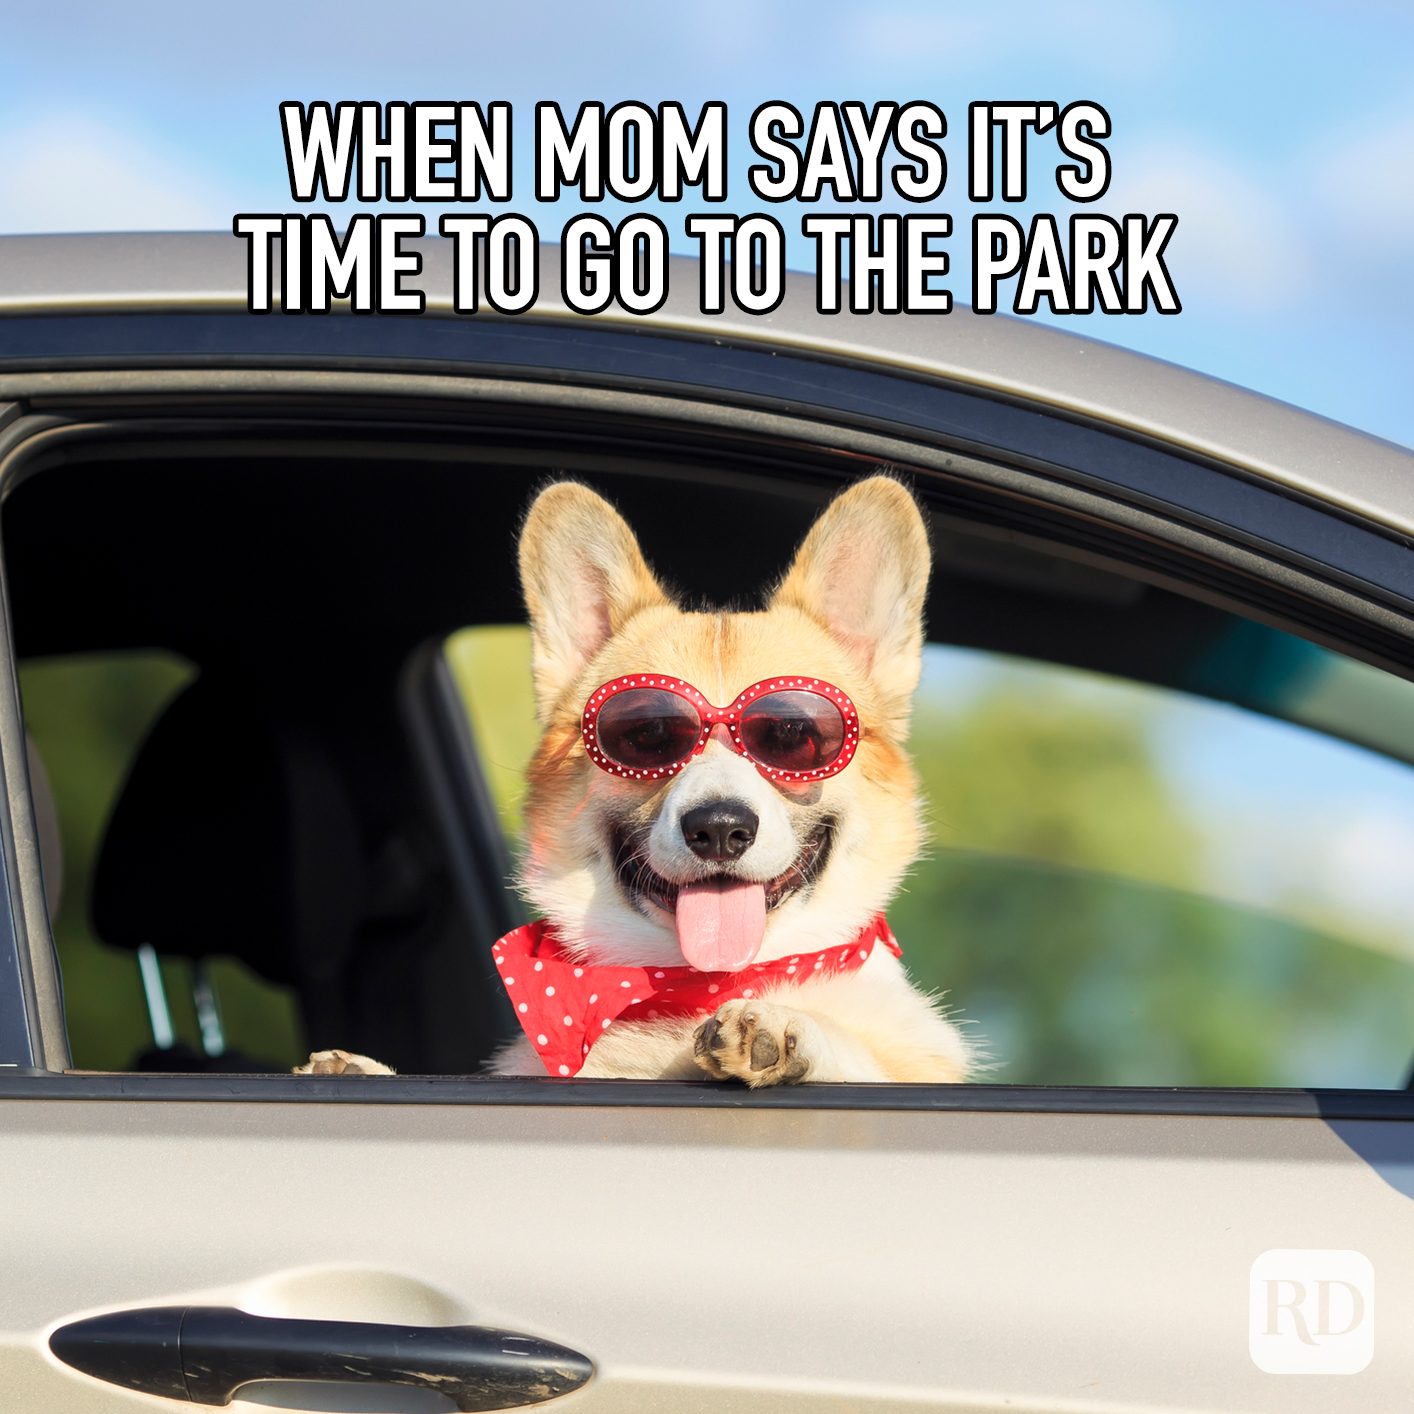 When Mom Says Its Time To Go To The Park meme text over happy corgi riding in car with sunglasses and scarf